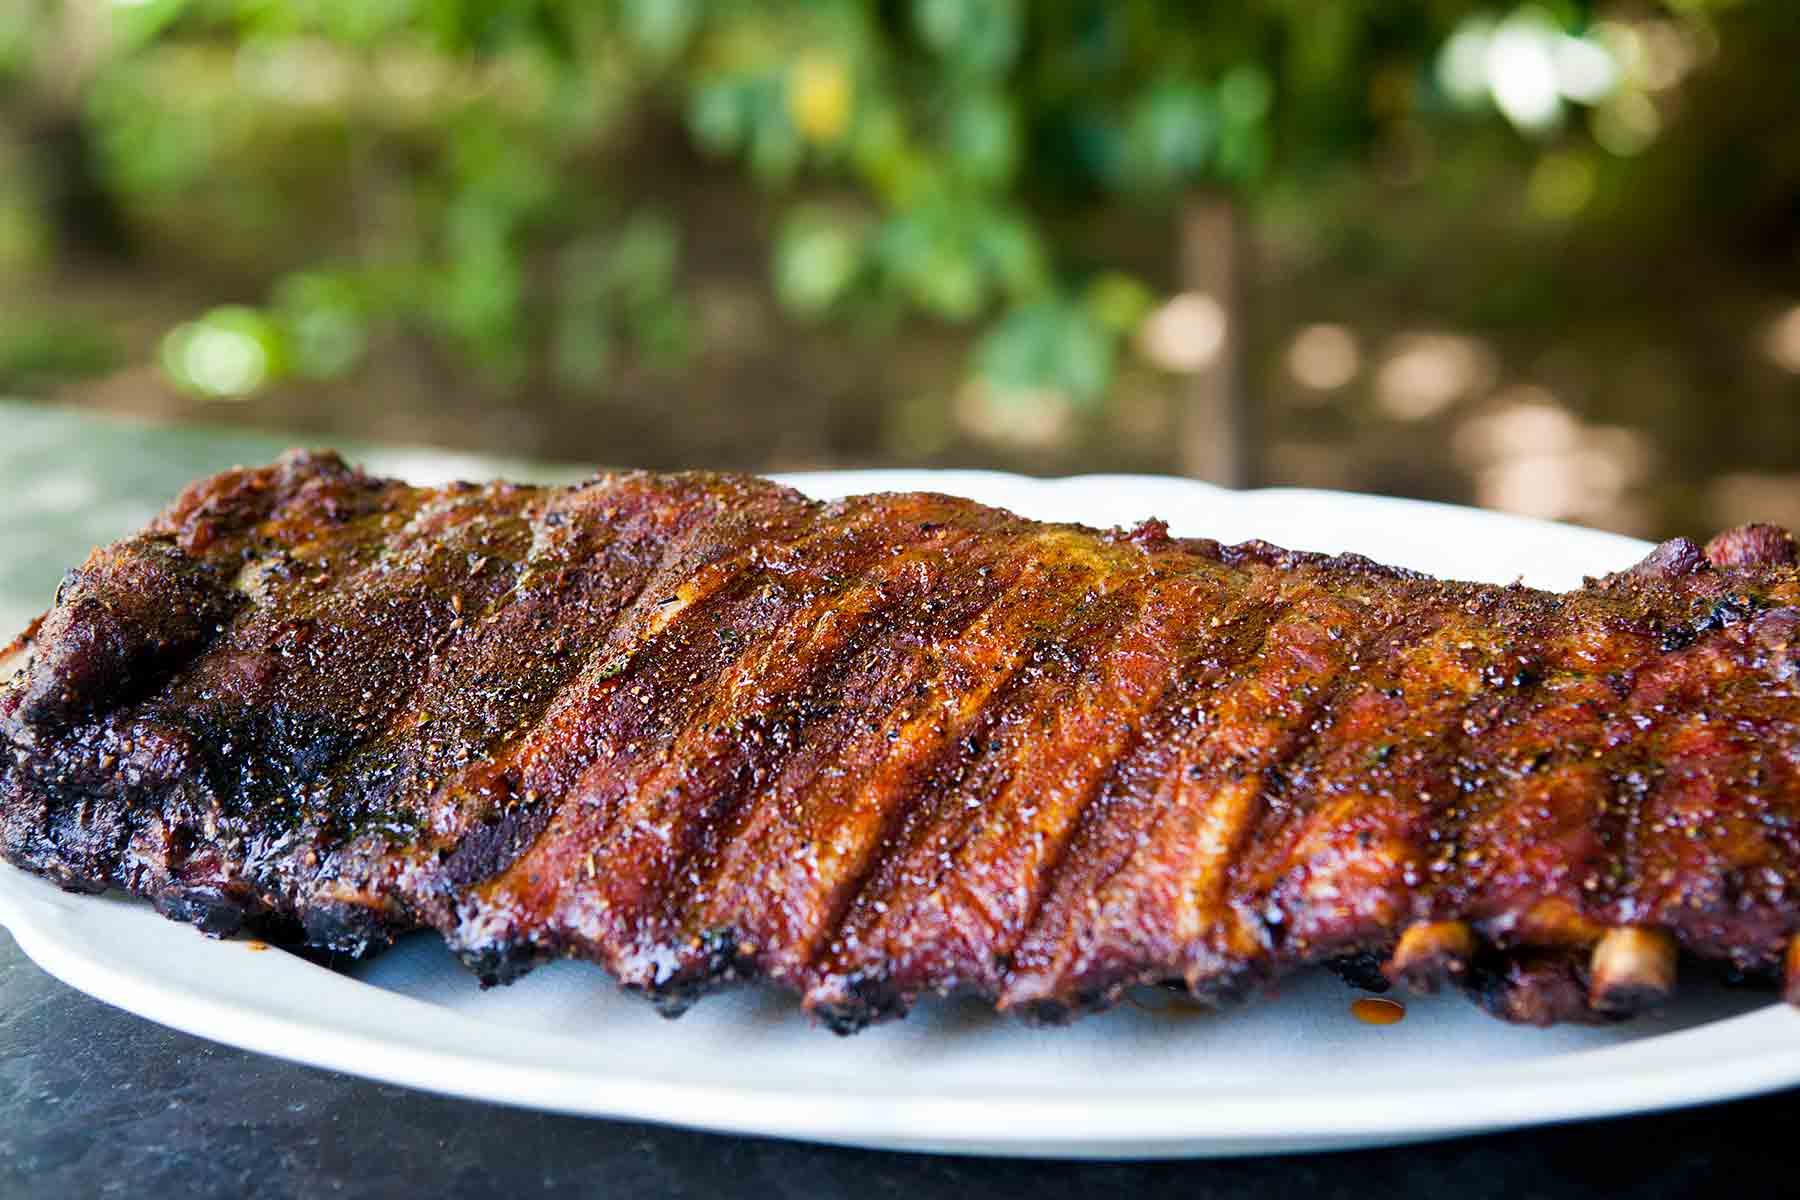 Grilled ribs recipe